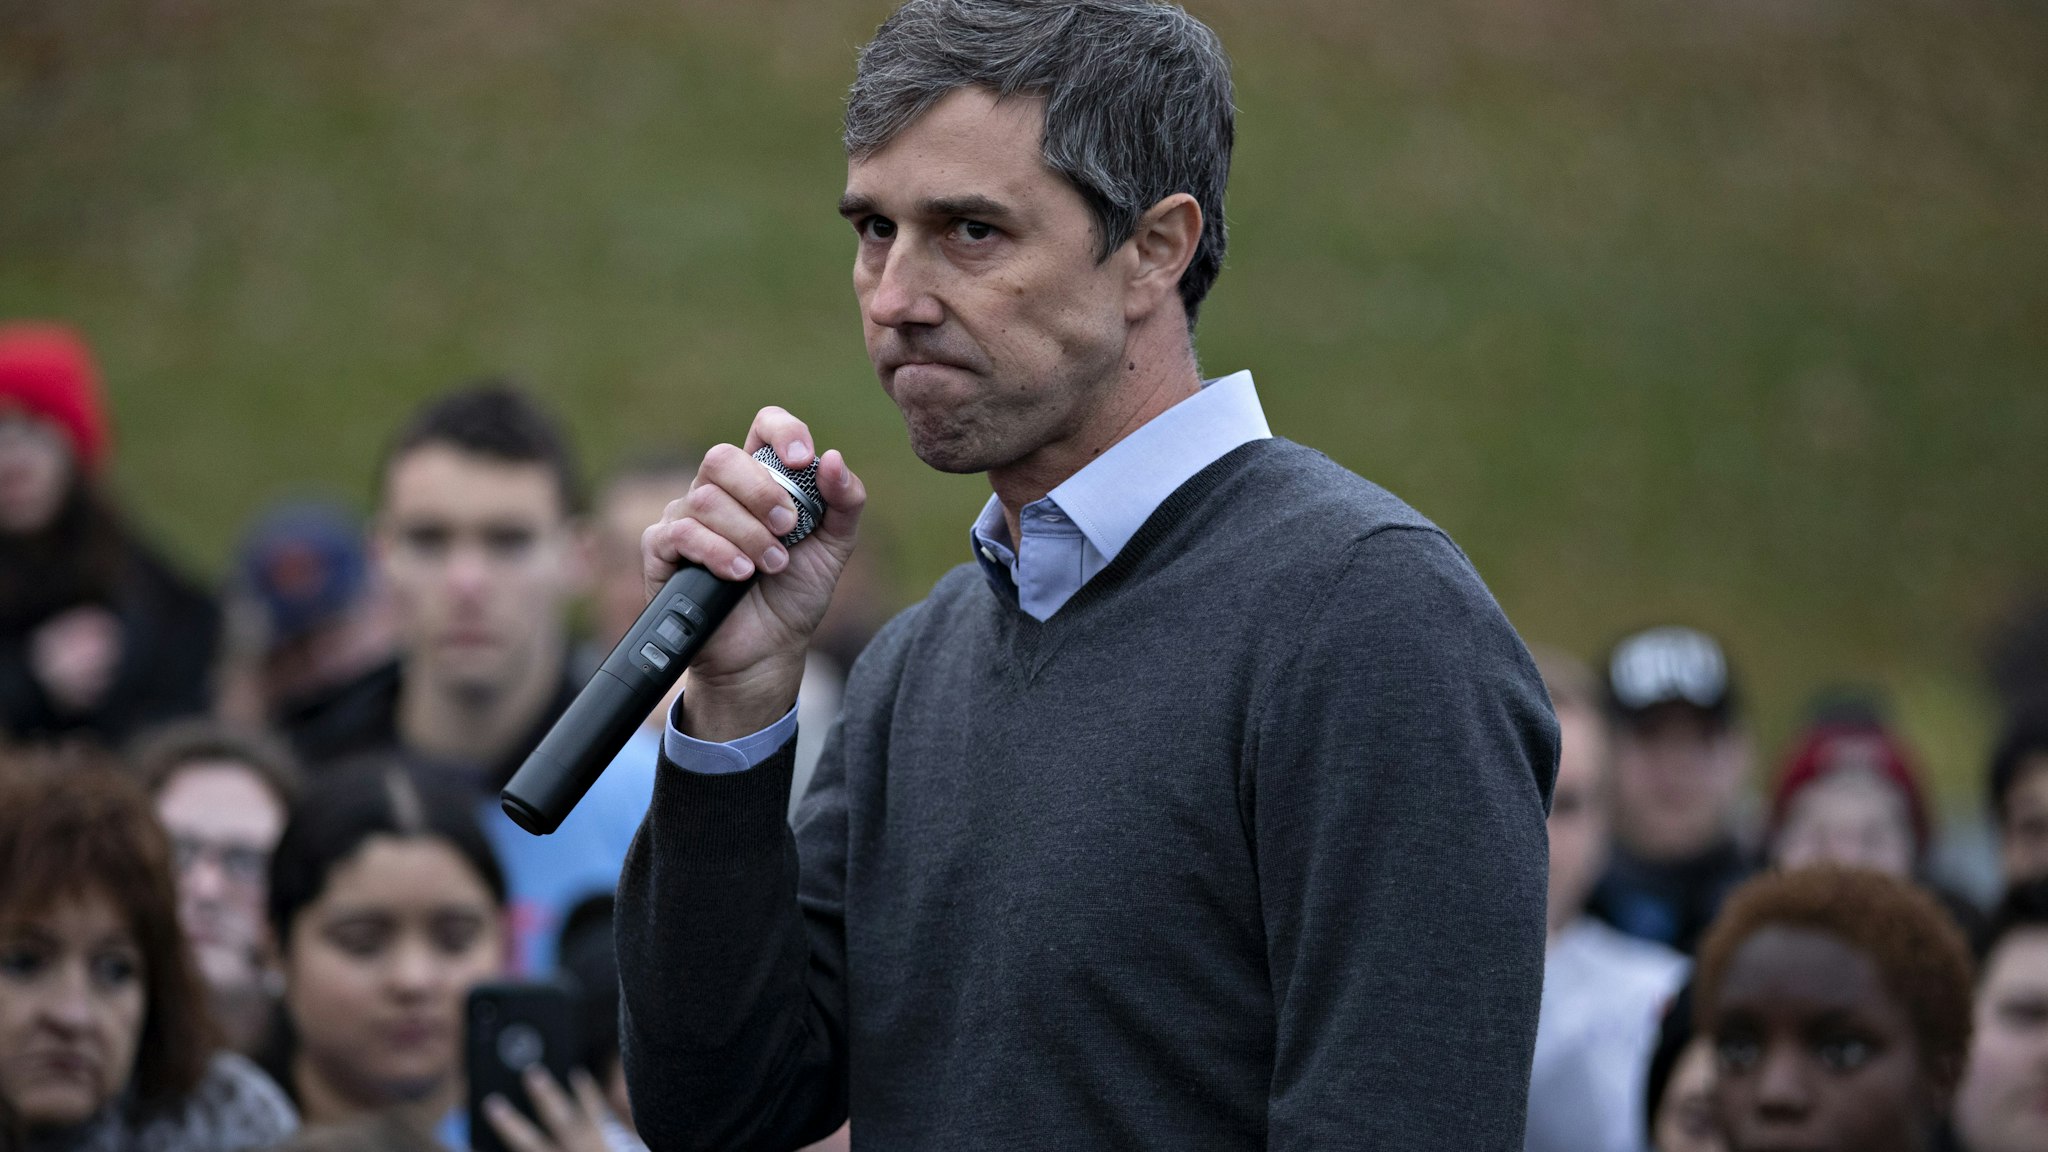 Beto O'Rourke, former Representative from Texas, speaks on the sidelines of the Iowa Democratic Party Liberty & Justice Dinner in Des Moines, Iowa, U.S., on Friday, Nov. 1, 2019. The former Texas congressman said in a blog post earlier in the day that he was ending his bid for the White House amid lackluster fundraising and poor poll numbers. Photographer: Daniel Acker/Bloomberg via Getty Images